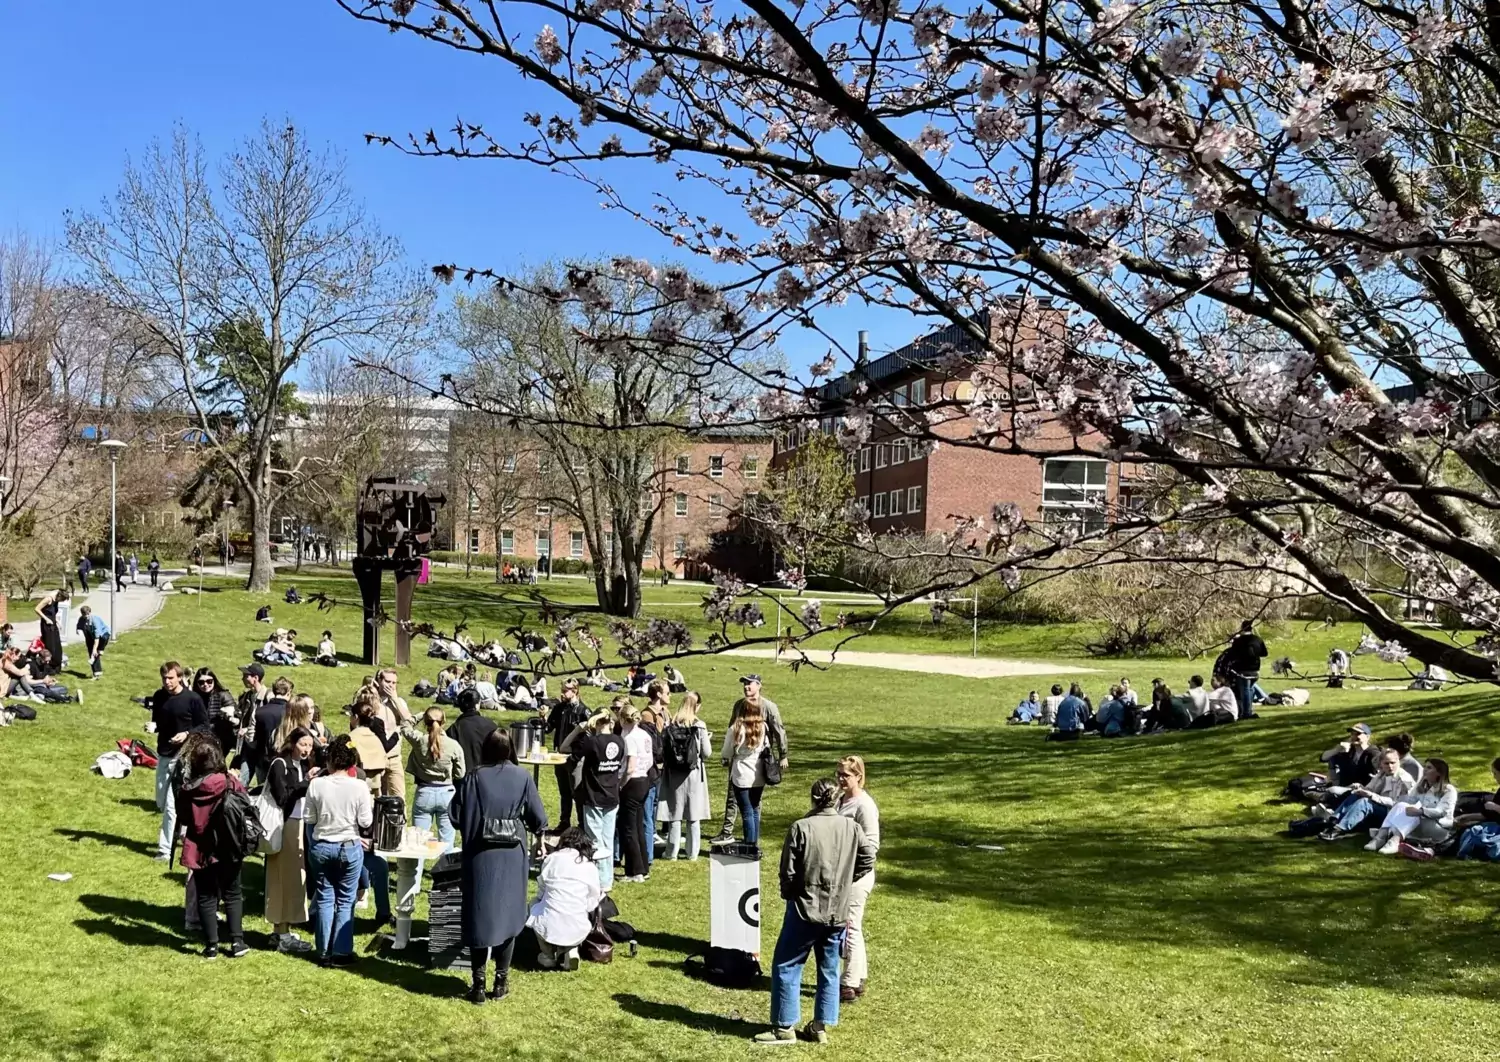 KI's president mingles with students on a sunny lawn.